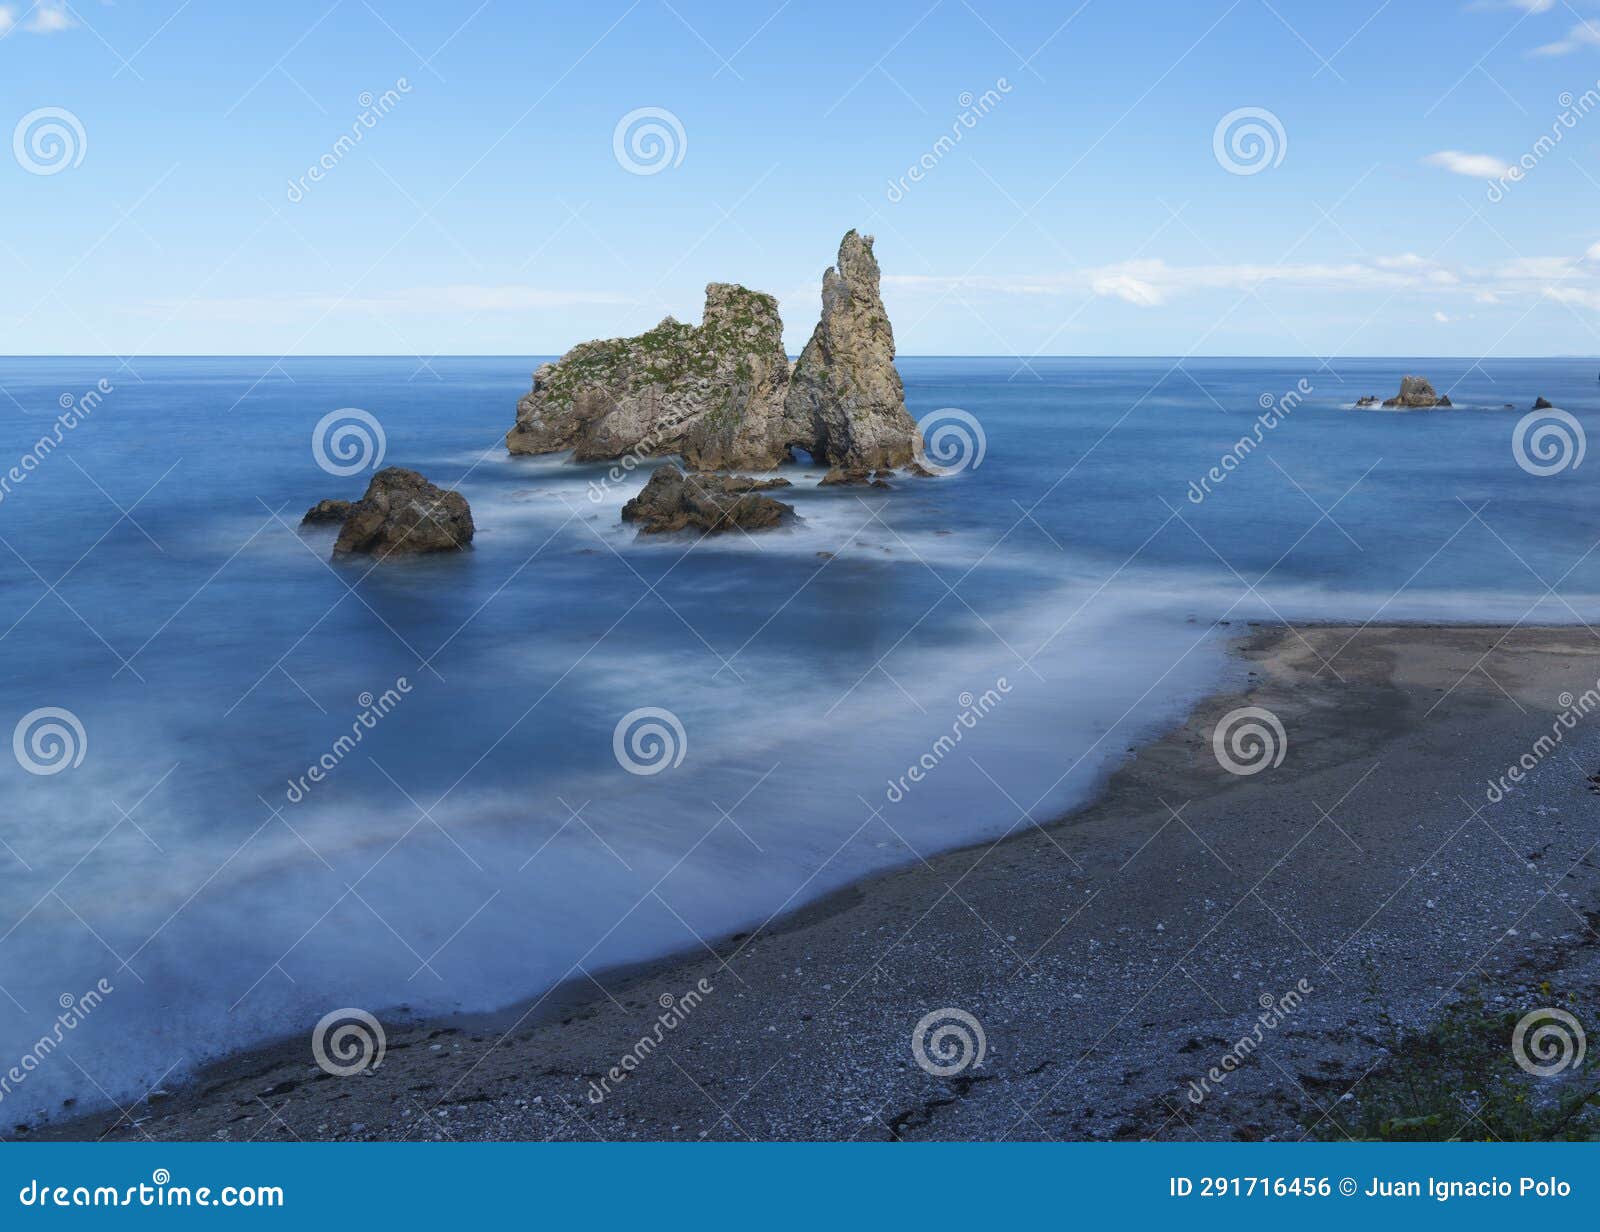 rocks in the blue waters of the cantabric sea, pendueles beach in asturias.